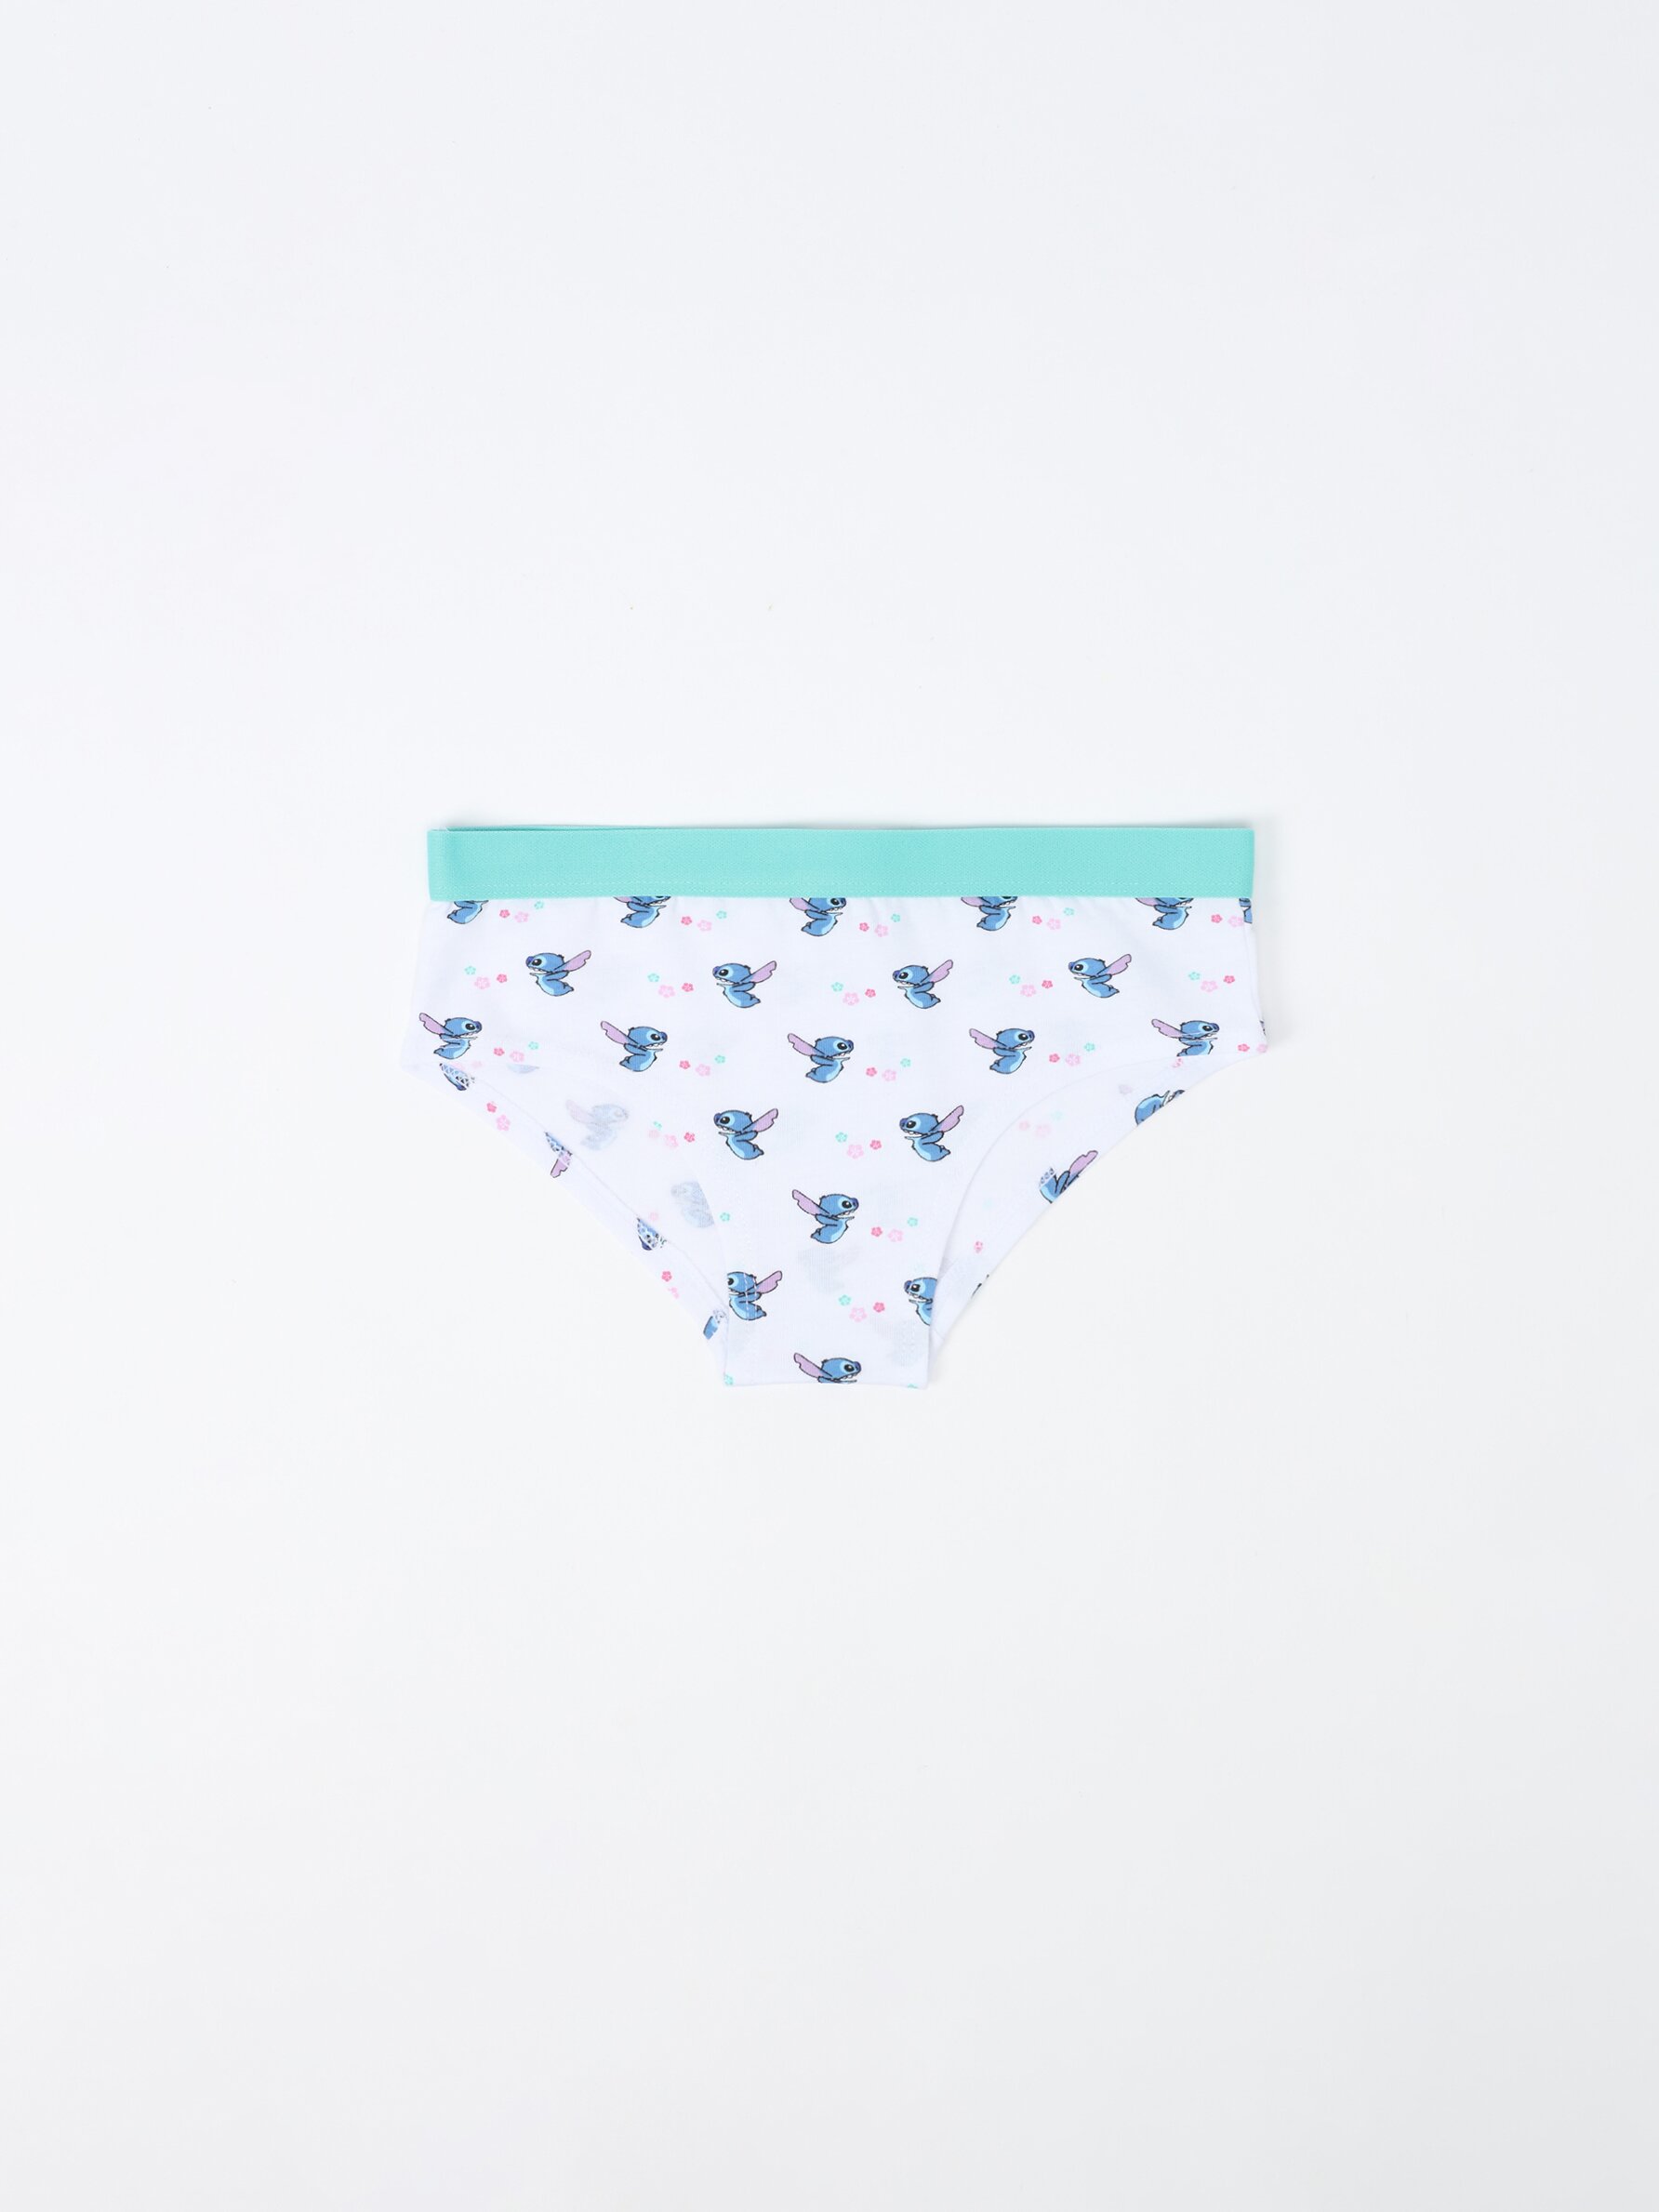 3-Pack of Lilo & Stitch ©Disney briefs - Collabs - CLOTHING - Boy - Kids 